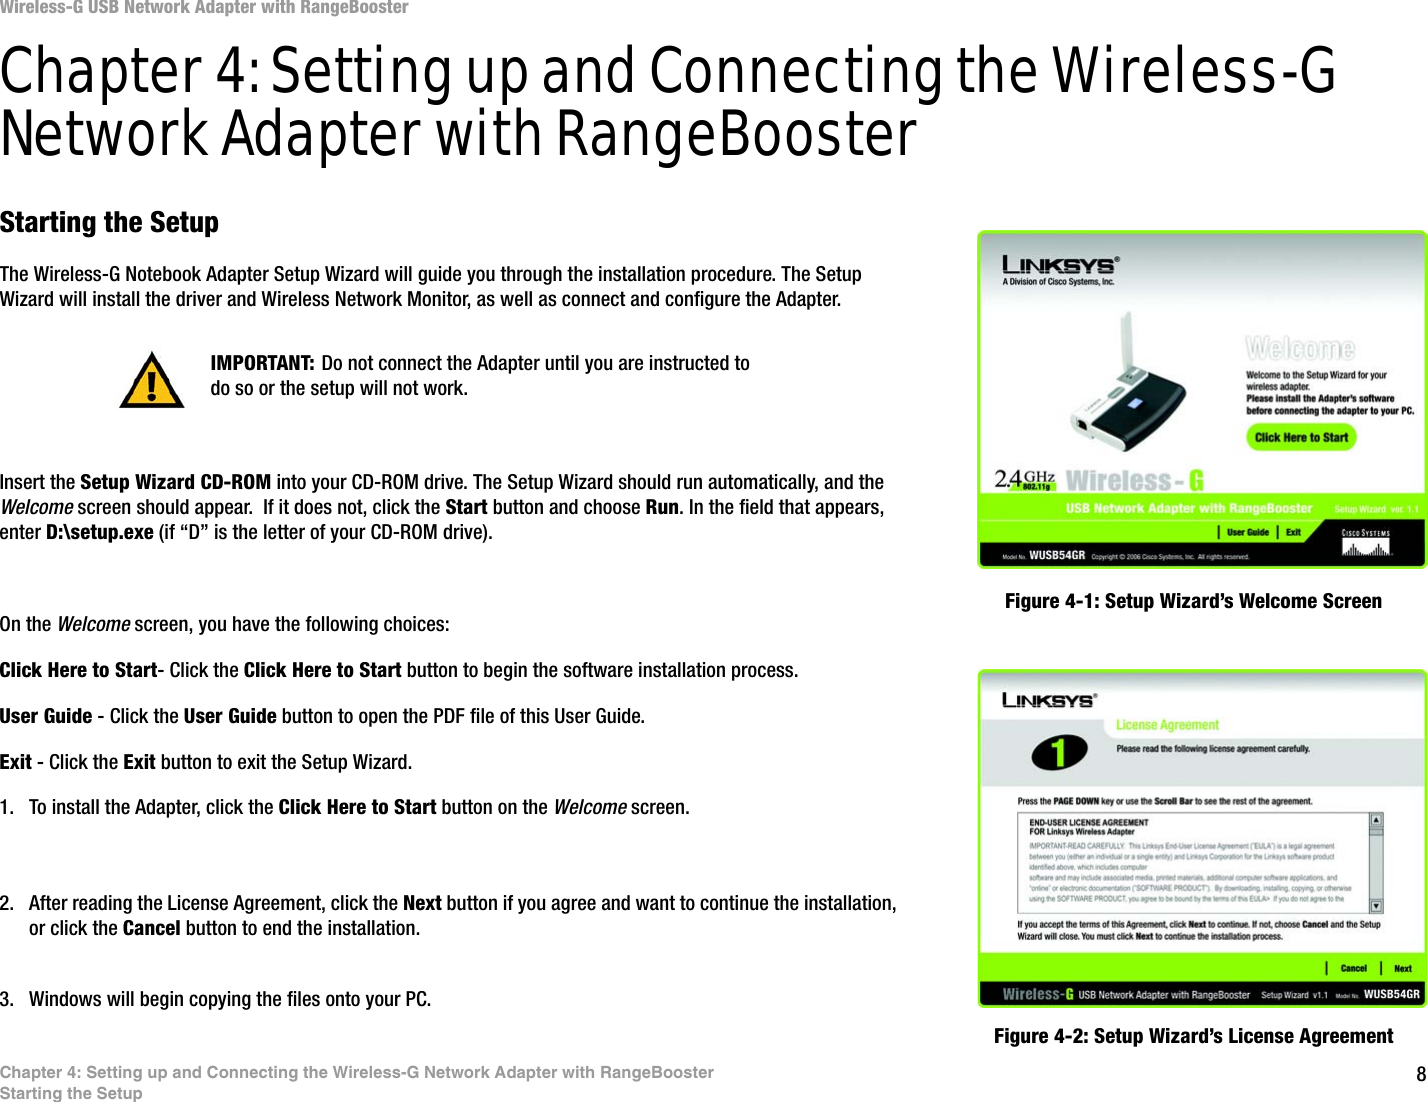 8Chapter 4: Setting up and Connecting the Wireless-G Network Adapter with RangeBoosterStarting the SetupWireless-G USB Network Adapter with RangeBoosterChapter 4: Setting up and Connecting the Wireless-G Network Adapter with RangeBoosterStarting the SetupThe Wireless-G Notebook Adapter Setup Wizard will guide you through the installation procedure. The Setup Wizard will install the driver and Wireless Network Monitor, as well as connect and configure the Adapter.Insert the Setup Wizard CD-ROM into your CD-ROM drive. The Setup Wizard should run automatically, and the Welcome screen should appear.  If it does not, click the Start button and choose Run. In the field that appears, enter D:\setup.exe (if “D” is the letter of your CD-ROM drive). On the Welcome screen, you have the following choices:Click Here to Start- Click the Click Here to Start button to begin the software installation process. User Guide - Click the User Guide button to open the PDF file of this User Guide. Exit - Click the Exit button to exit the Setup Wizard.1. To install the Adapter, click the Click Here to Start button on the Welcome screen.2. After reading the License Agreement, click the Next button if you agree and want to continue the installation, or click the Cancel button to end the installation.3. Windows will begin copying the files onto your PC. Figure 4-1: Setup Wizard’s Welcome ScreenFigure 4-2: Setup Wizard’s License AgreementIMPORTANT: Do not connect the Adapter until you are instructed to do so or the setup will not work.